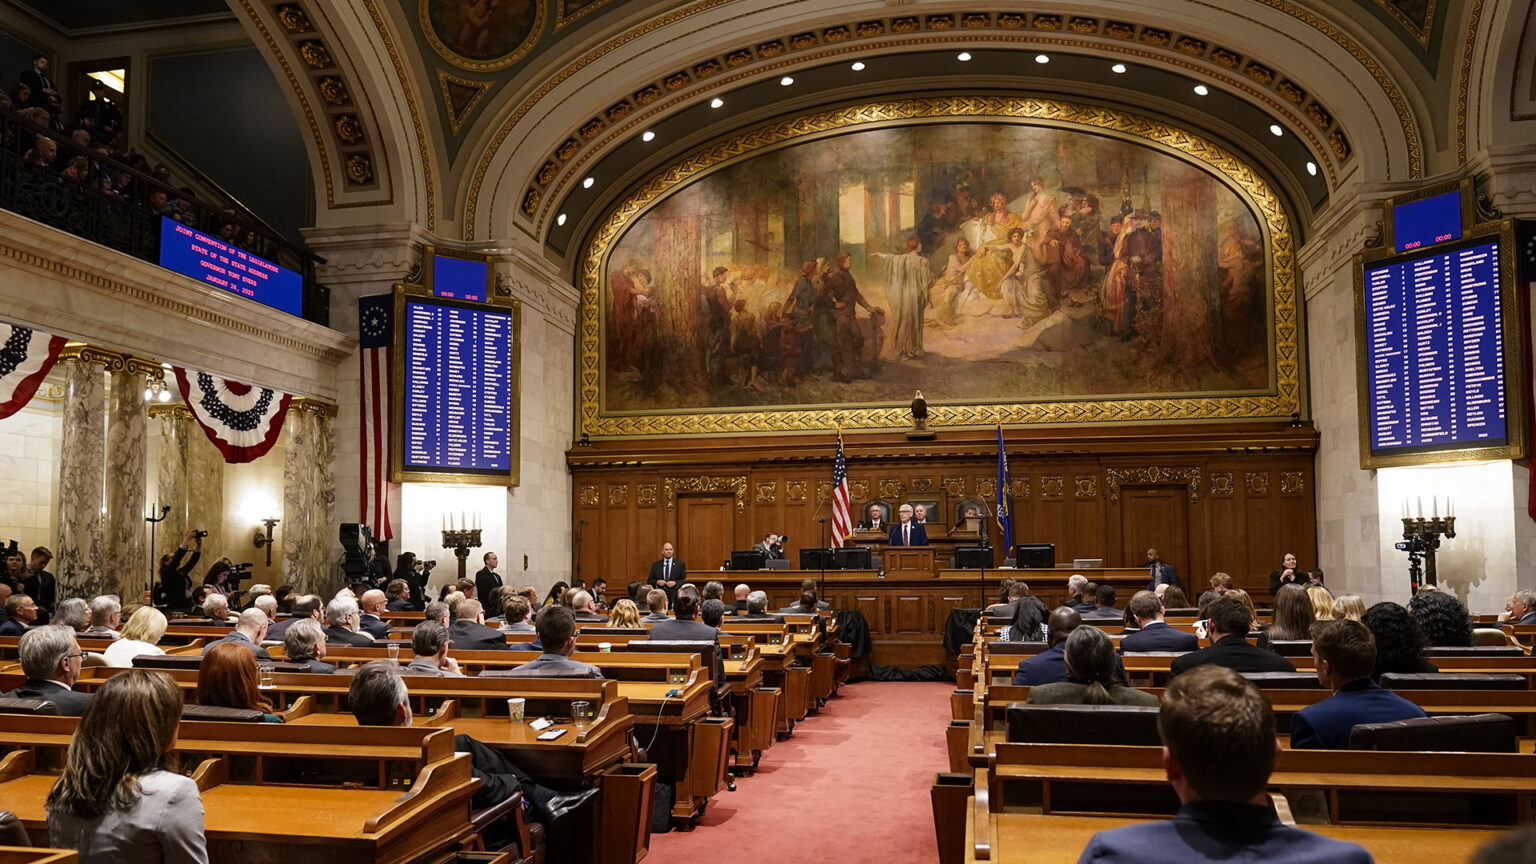 Tony Evers speaks while standing at a podium at the far end of a room as legislators are seated behind him and at rows of desks facing him, in a room with marble pillars and vaulted-arch supports, and a large fresco-style painting and taxidermy bald eagle on the wall above the dais.